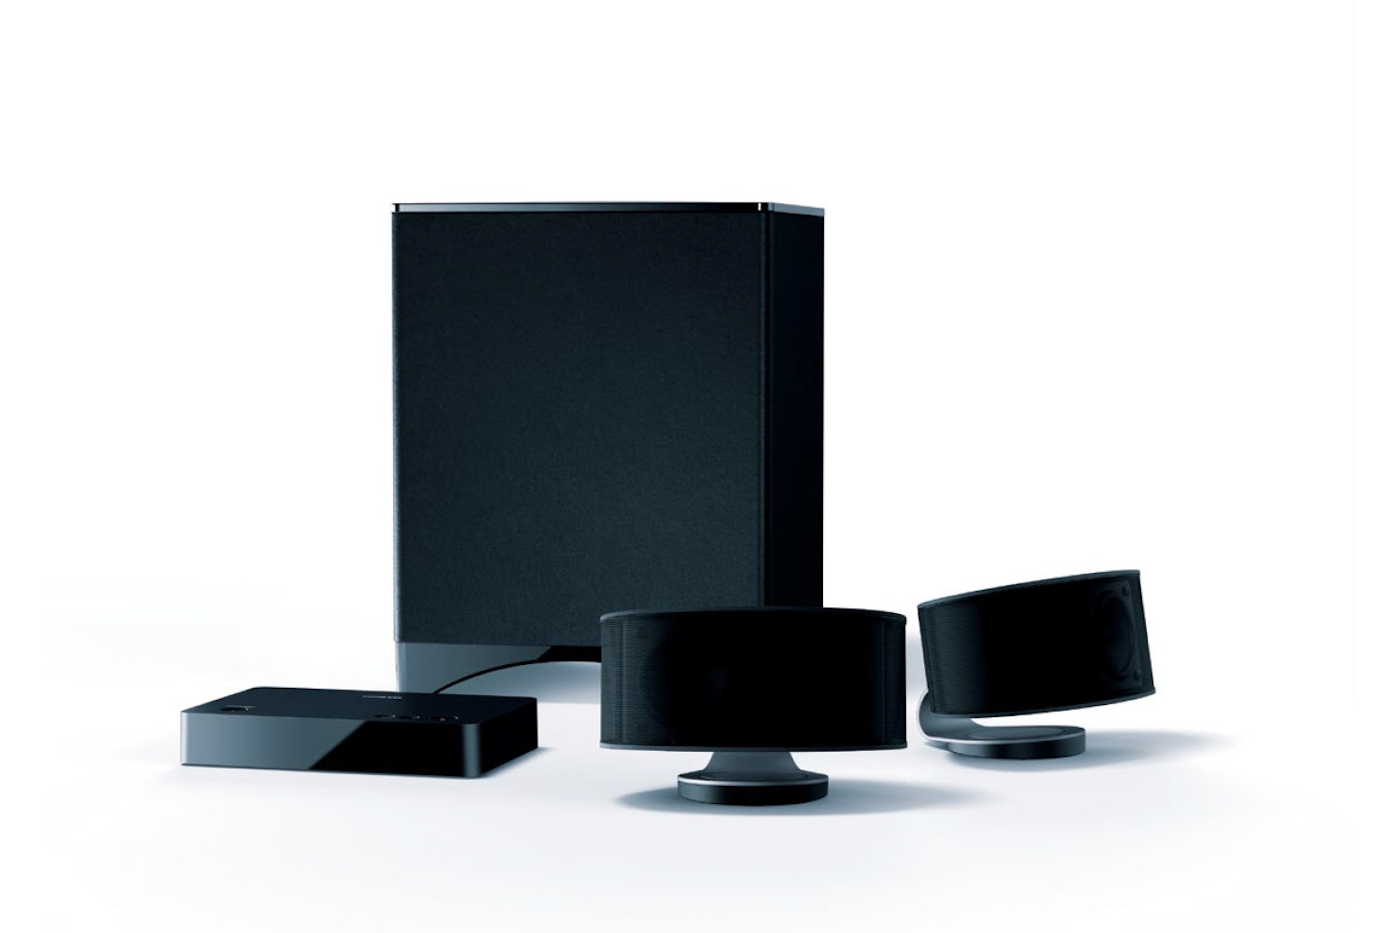 LS-3100 home audio system in black